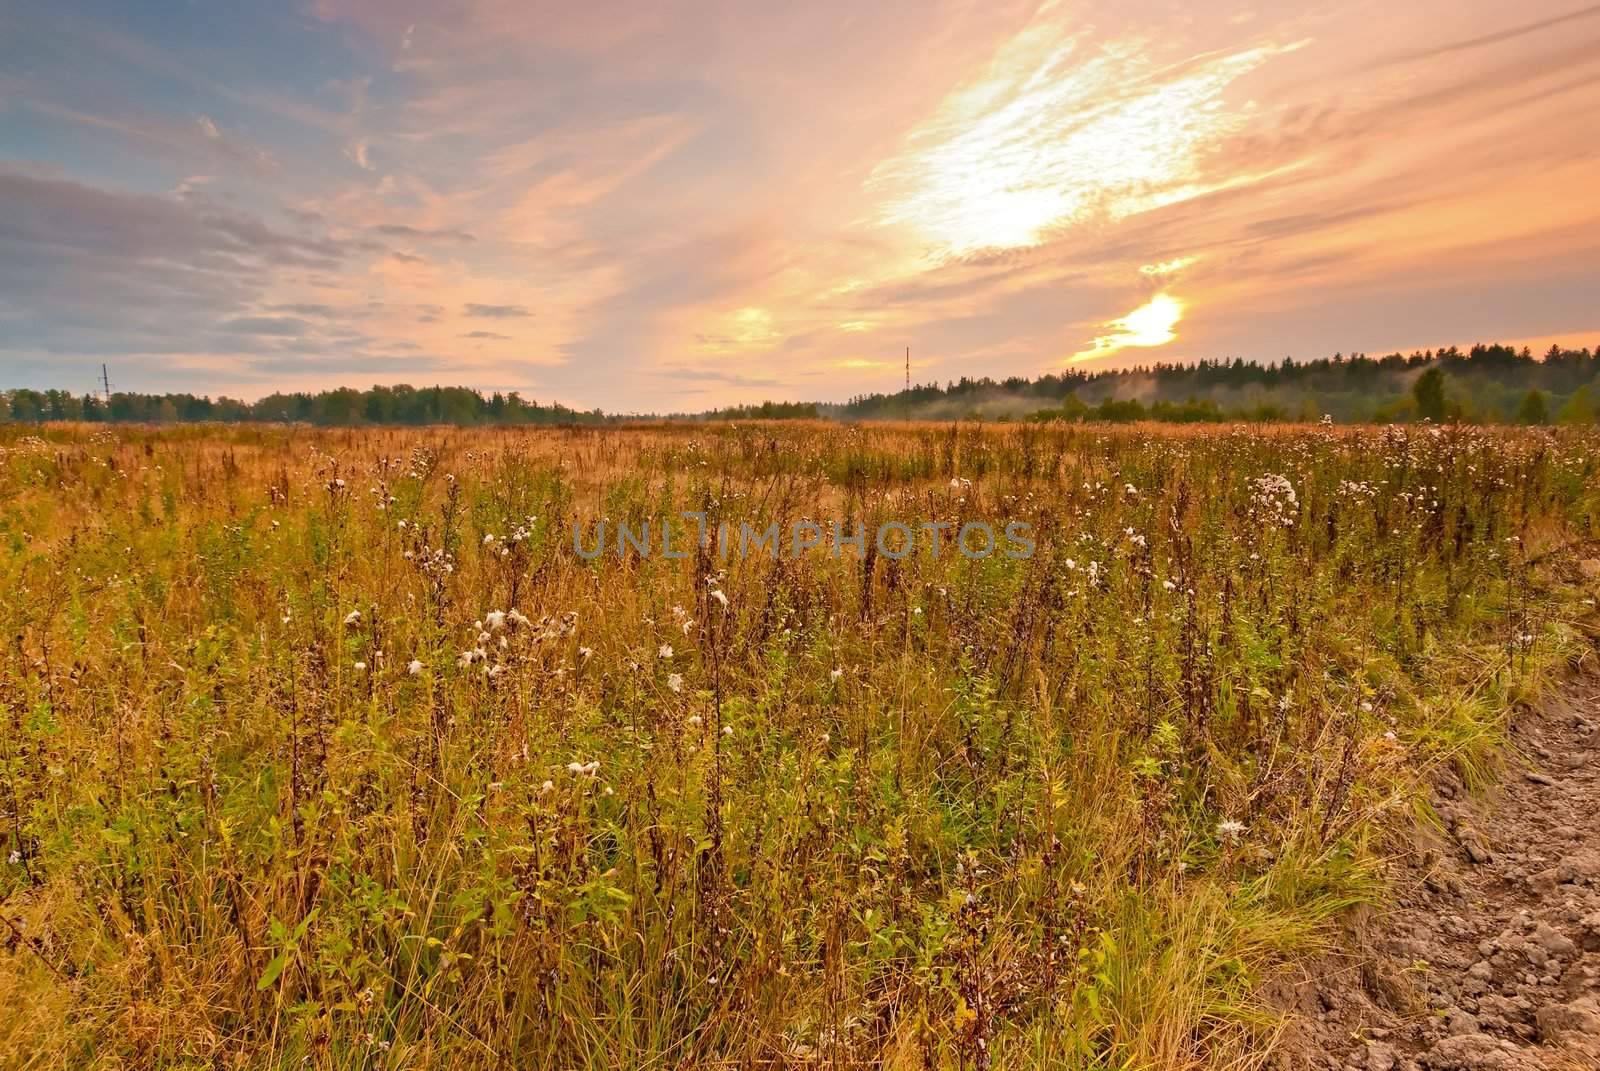 Wild field in central Russia at dawn by kosmsos111